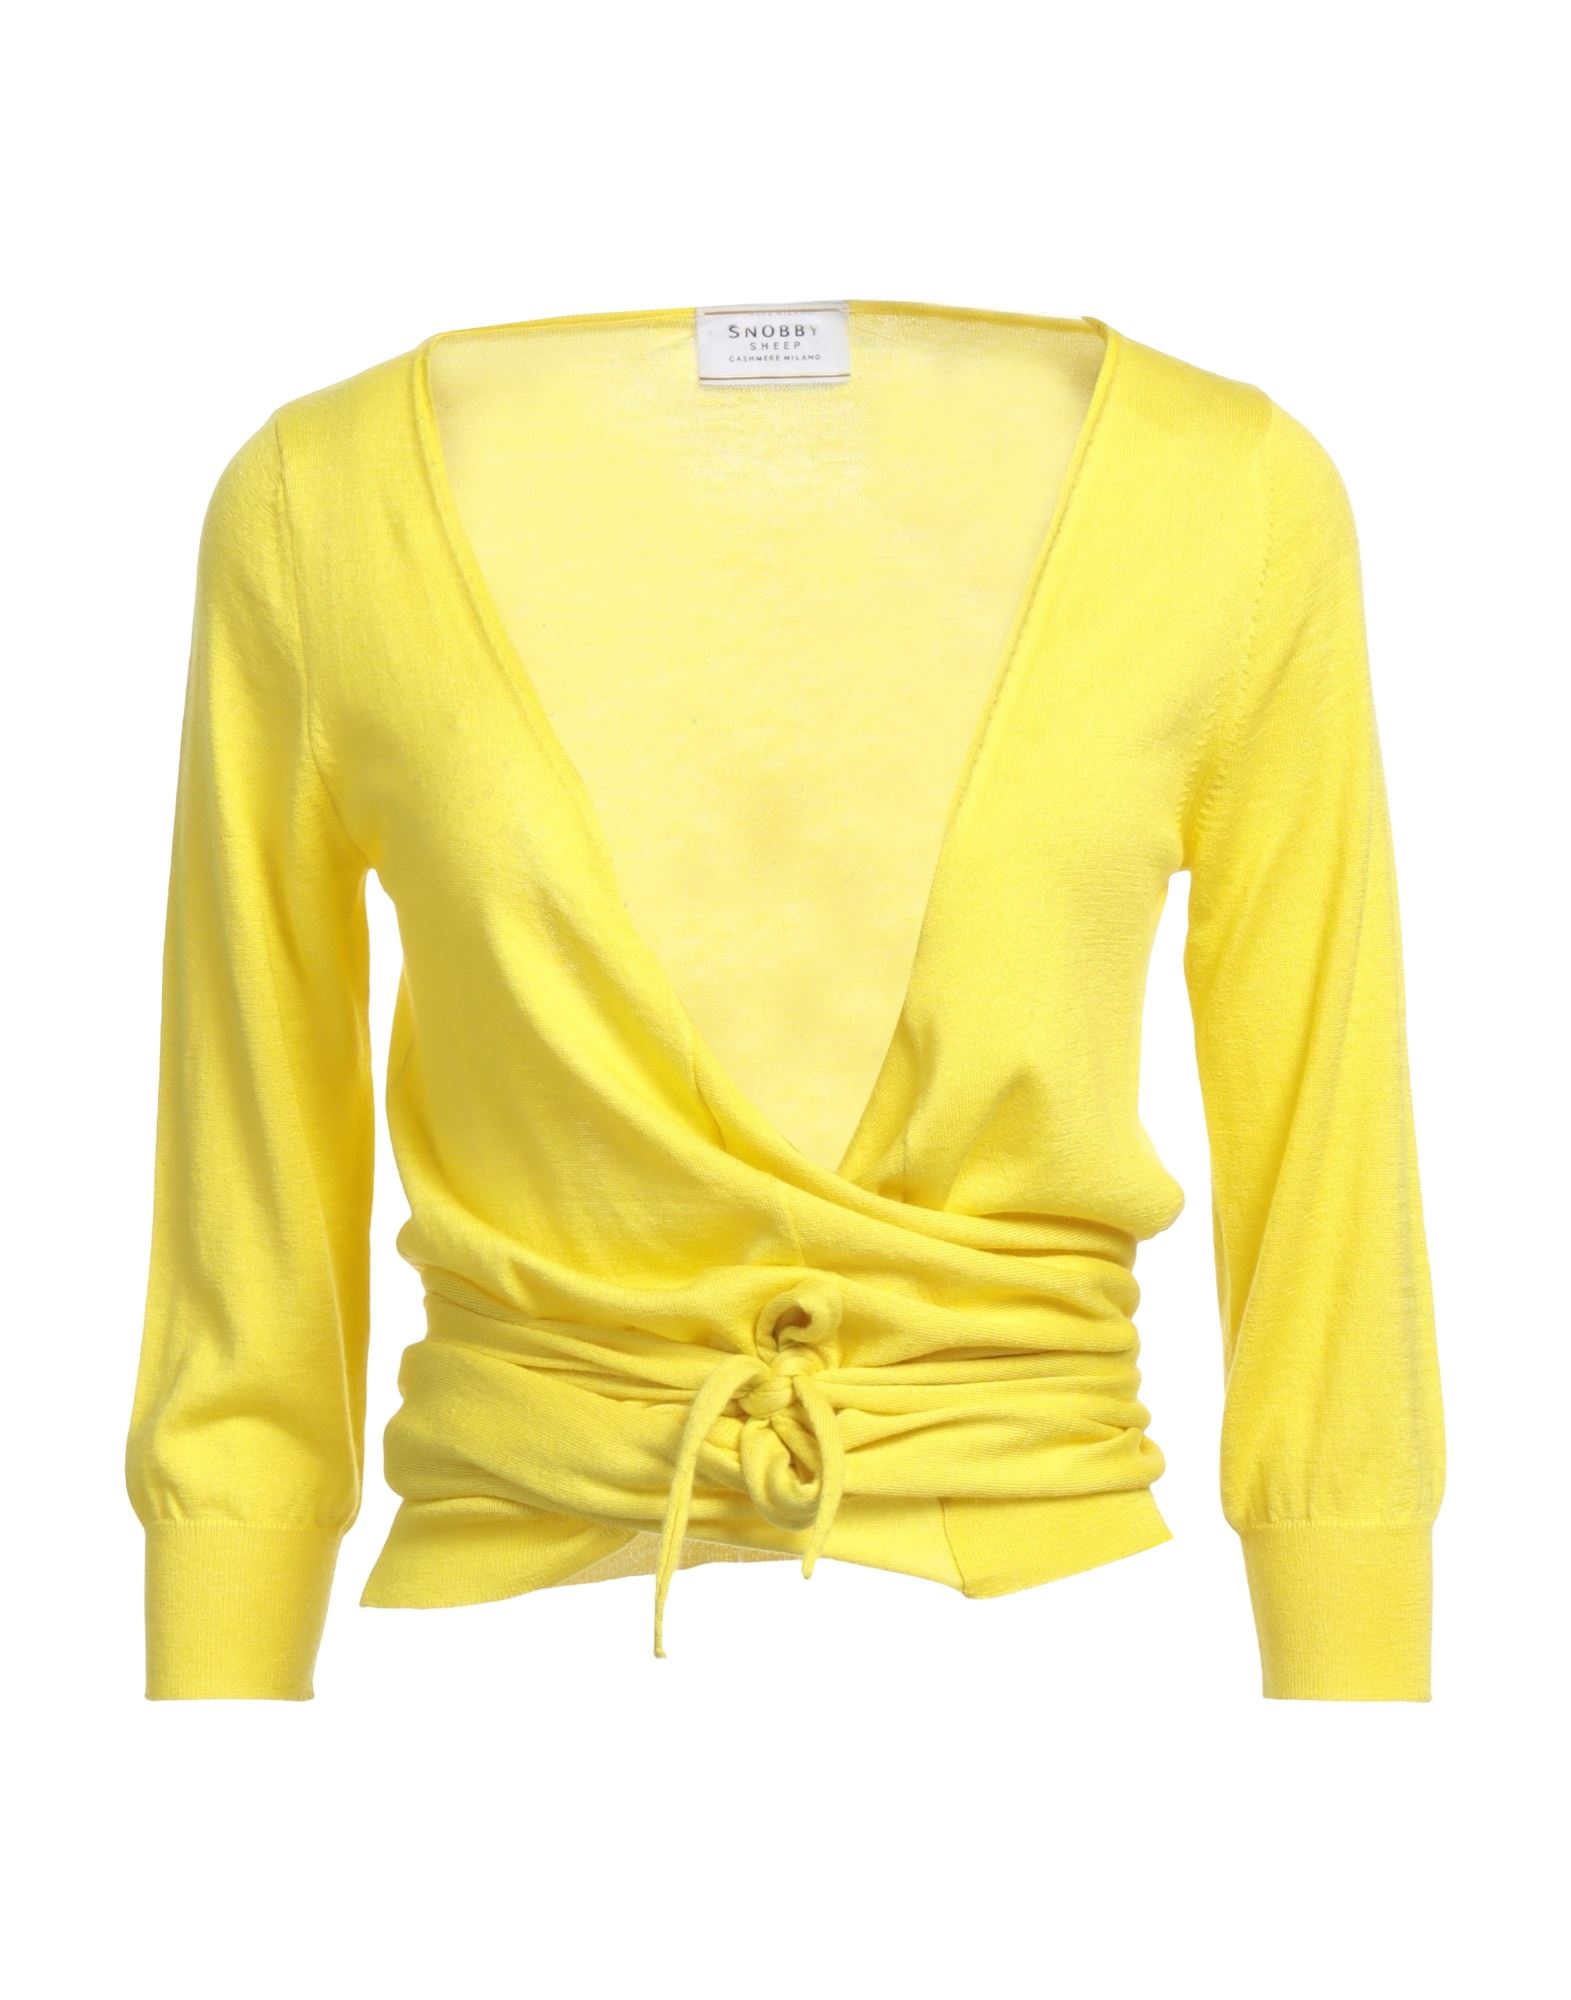 Snobby Sheep Wrap Cardigans In Yellow